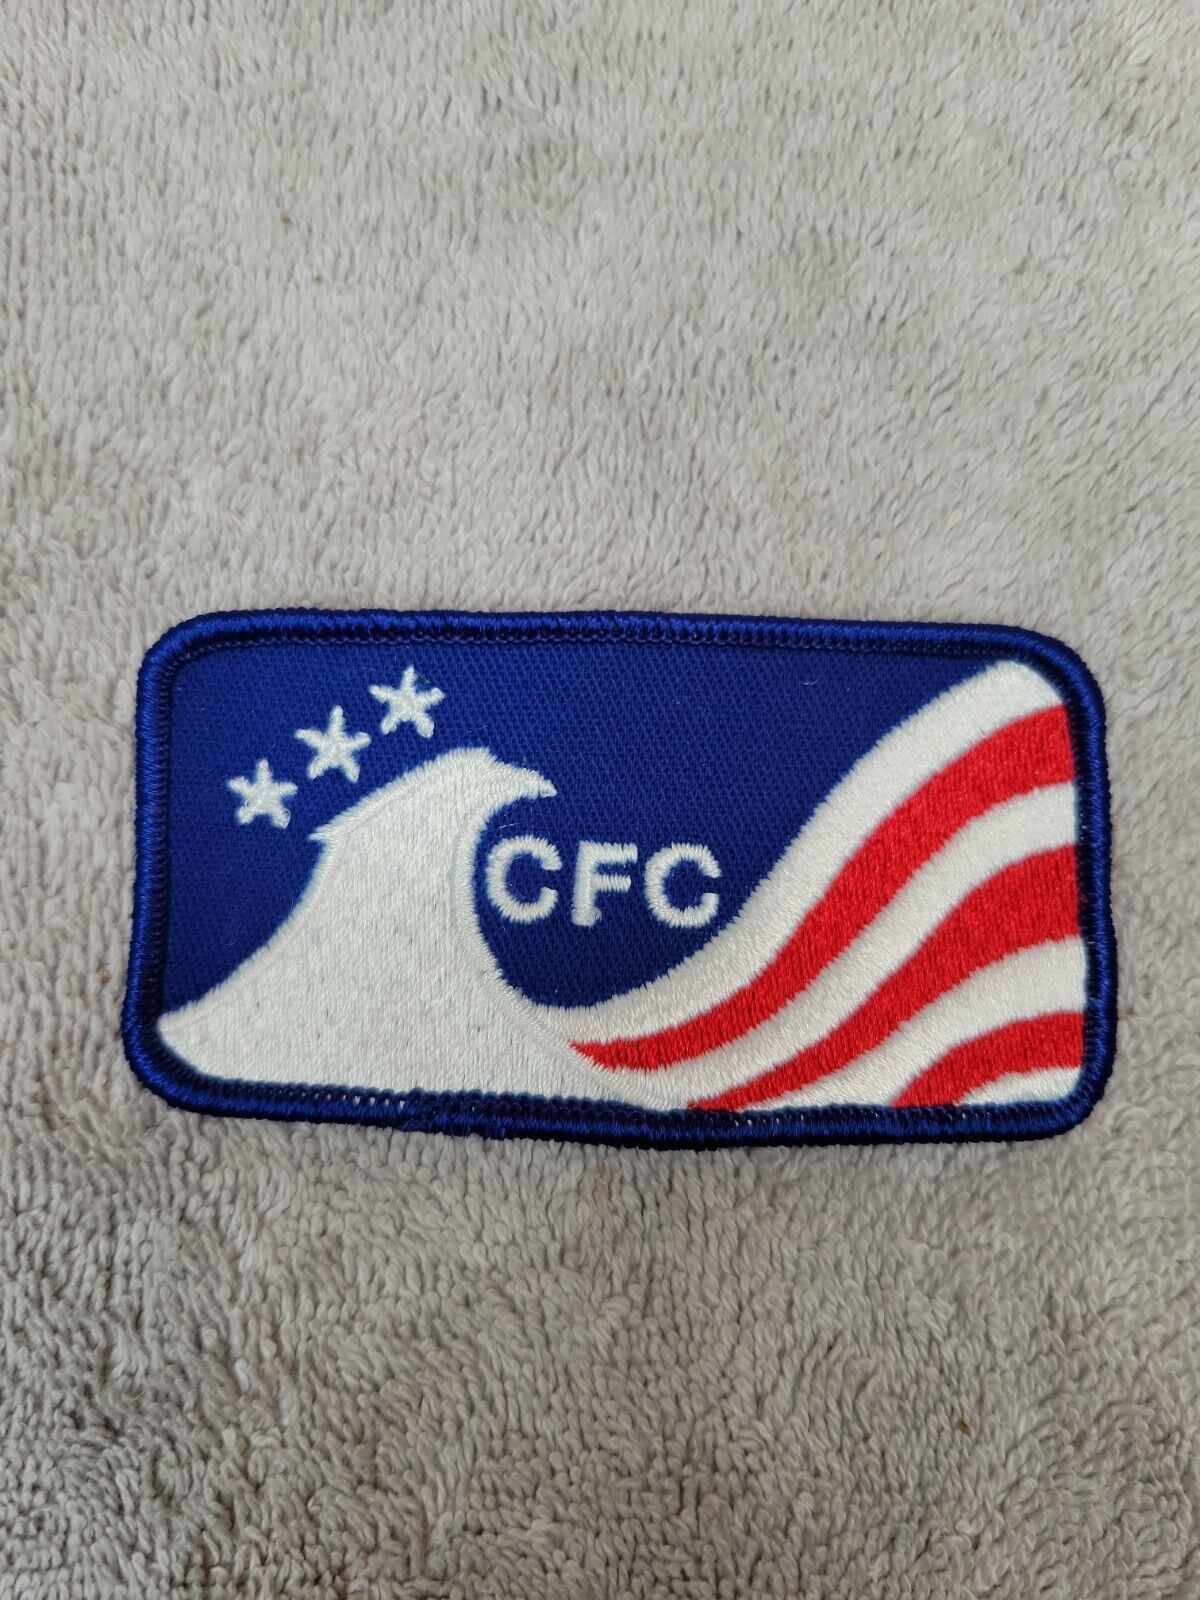 CFC American Eagle Jacket Patch - Combined Federal Campaign USA United Way Patch